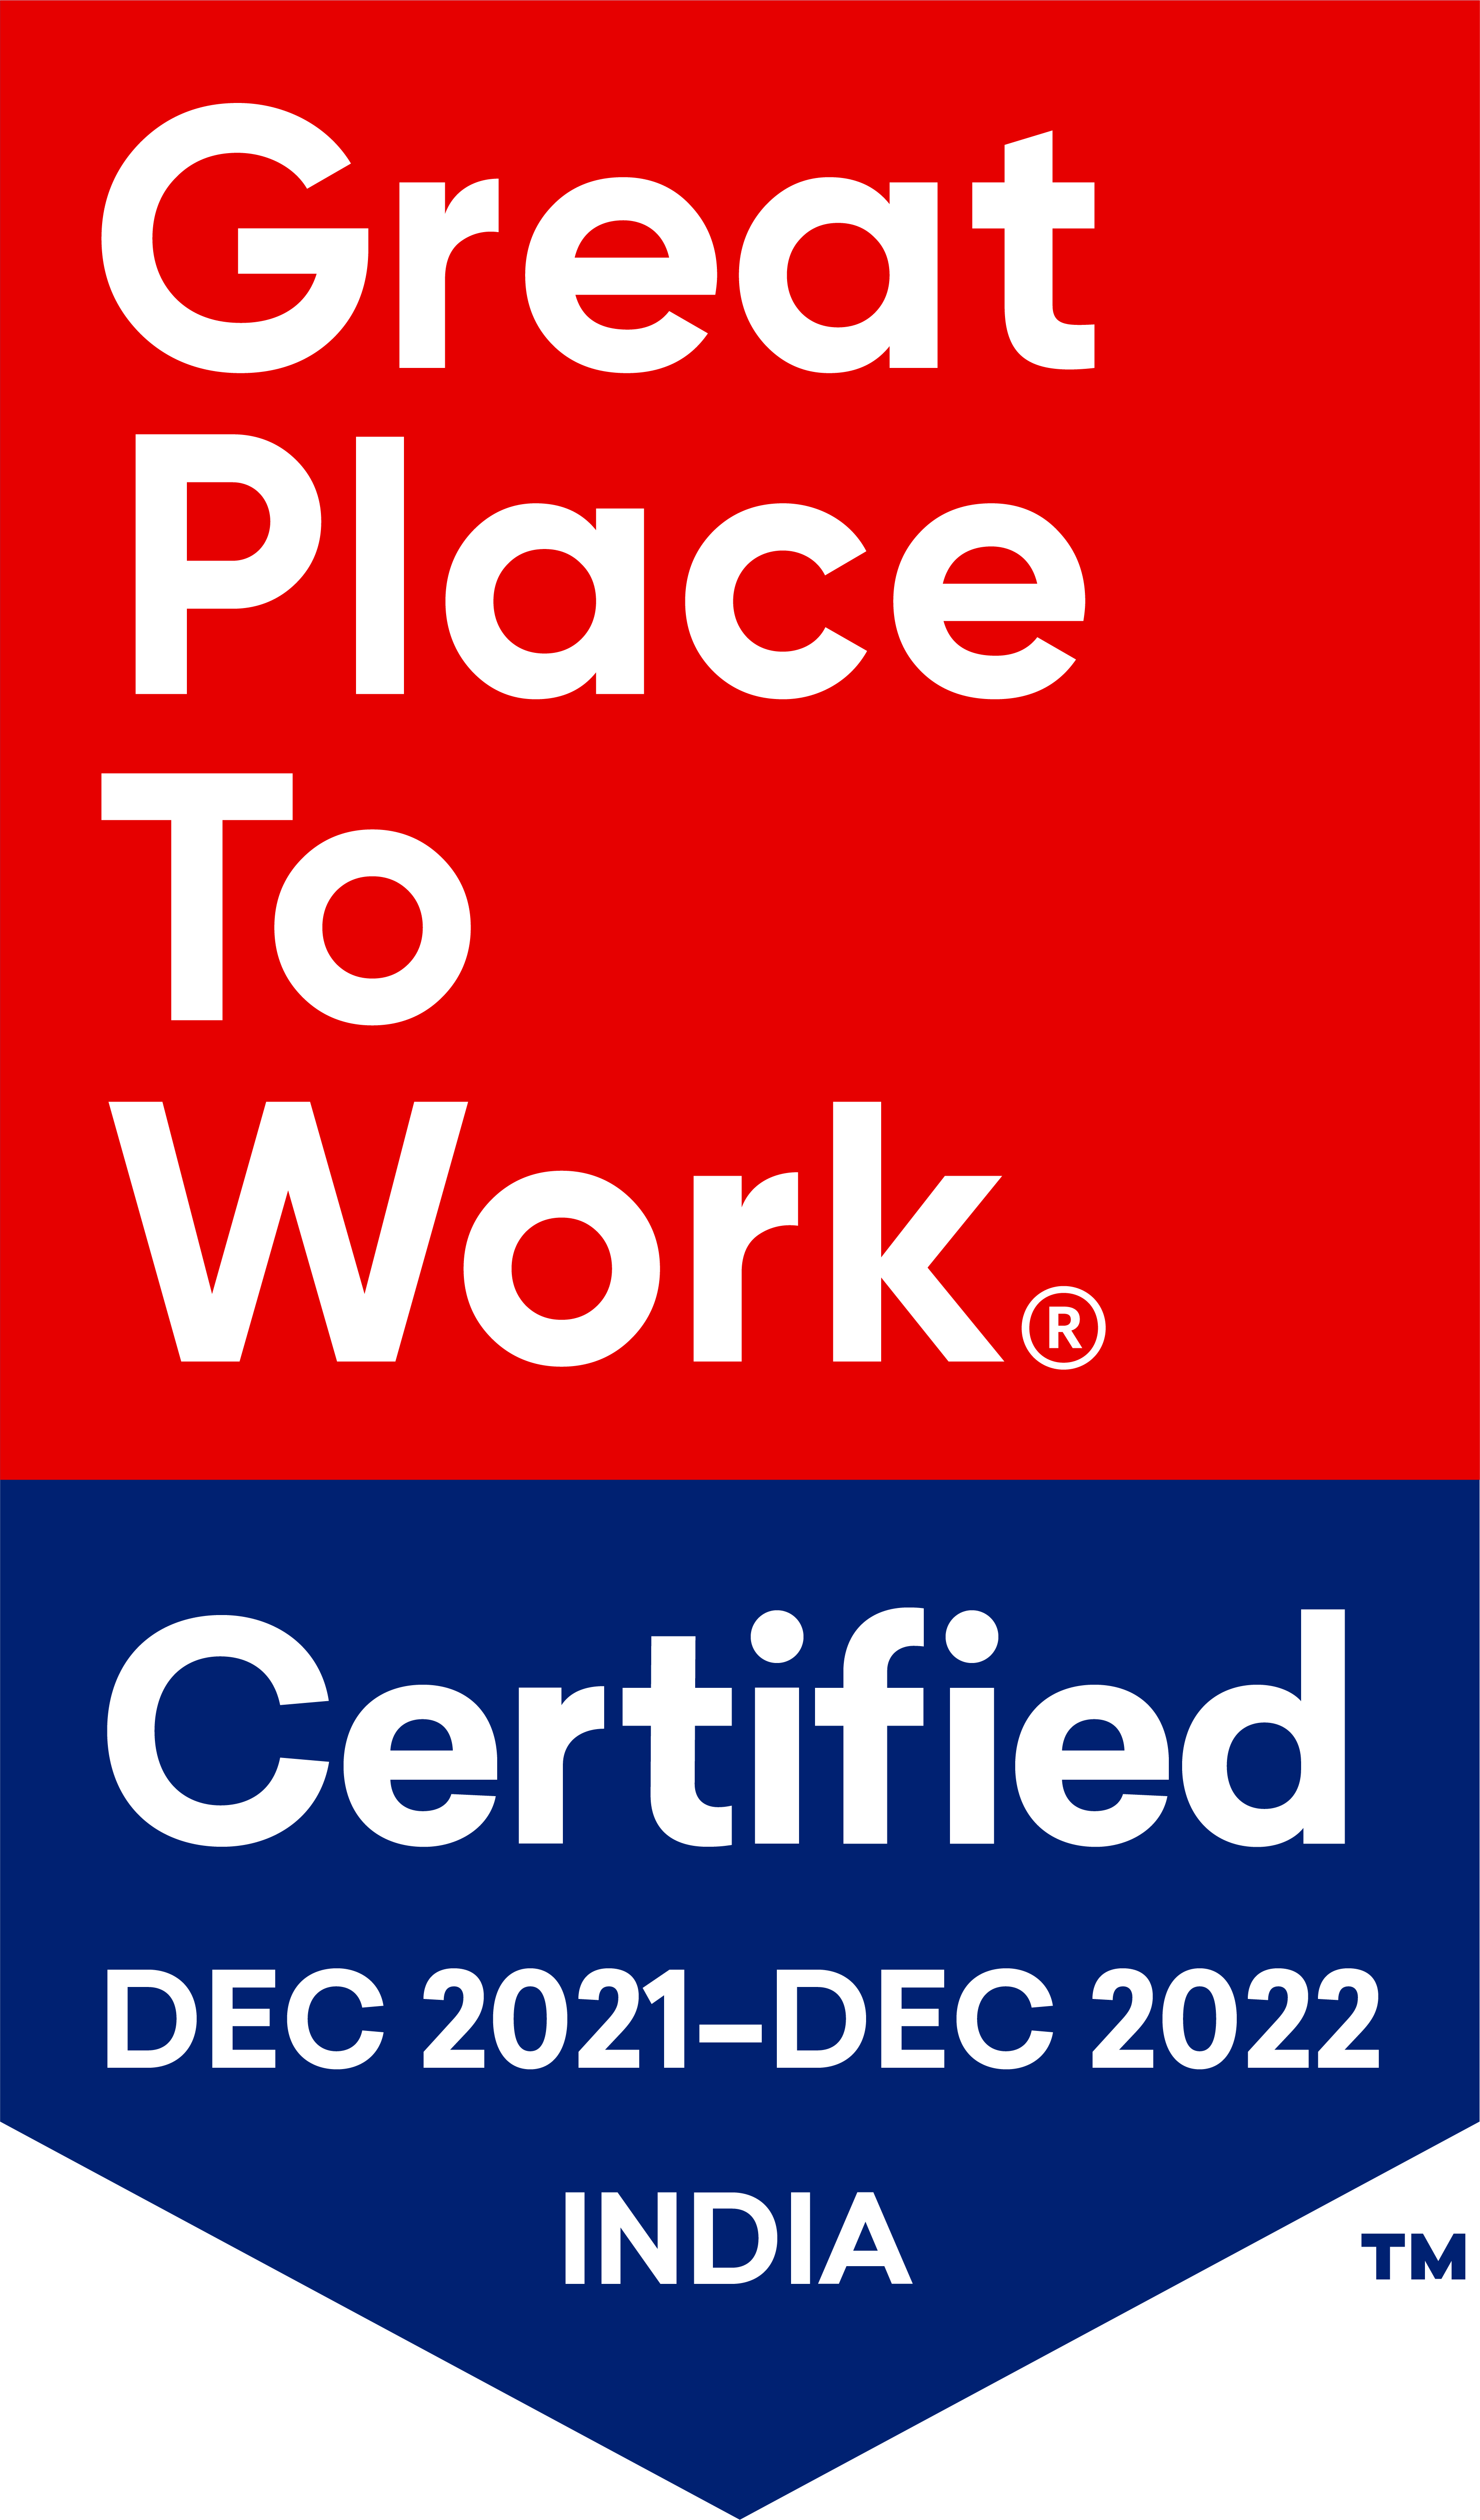 Chargebee is Great Place to Work-Certified™